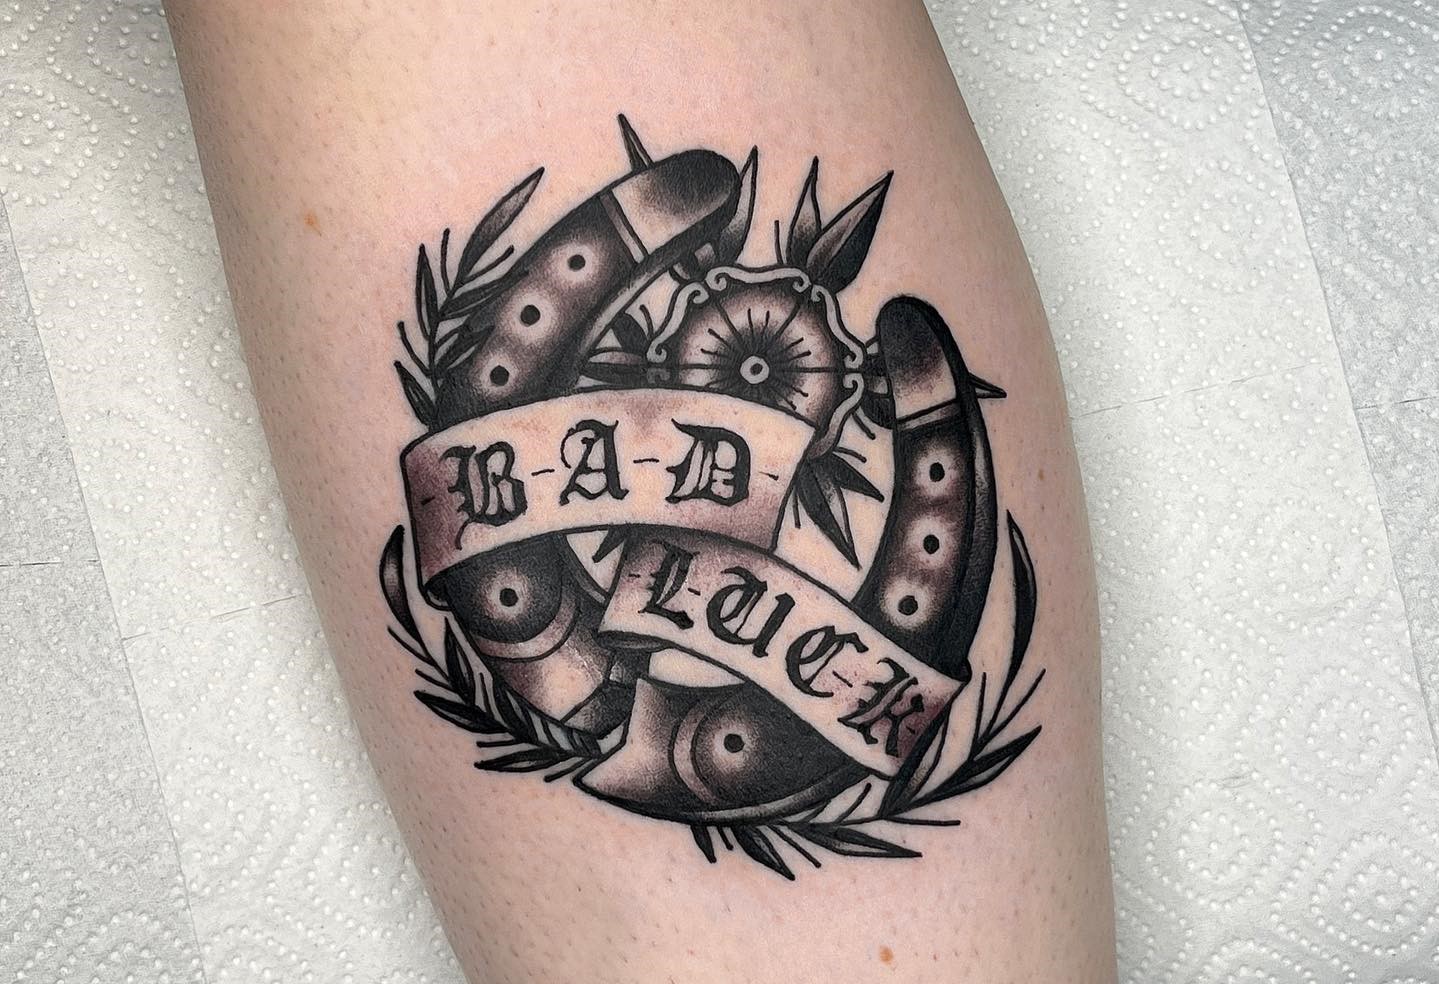 13 Tattoo Ideas  Is This Intriguing Design Good Or Bad